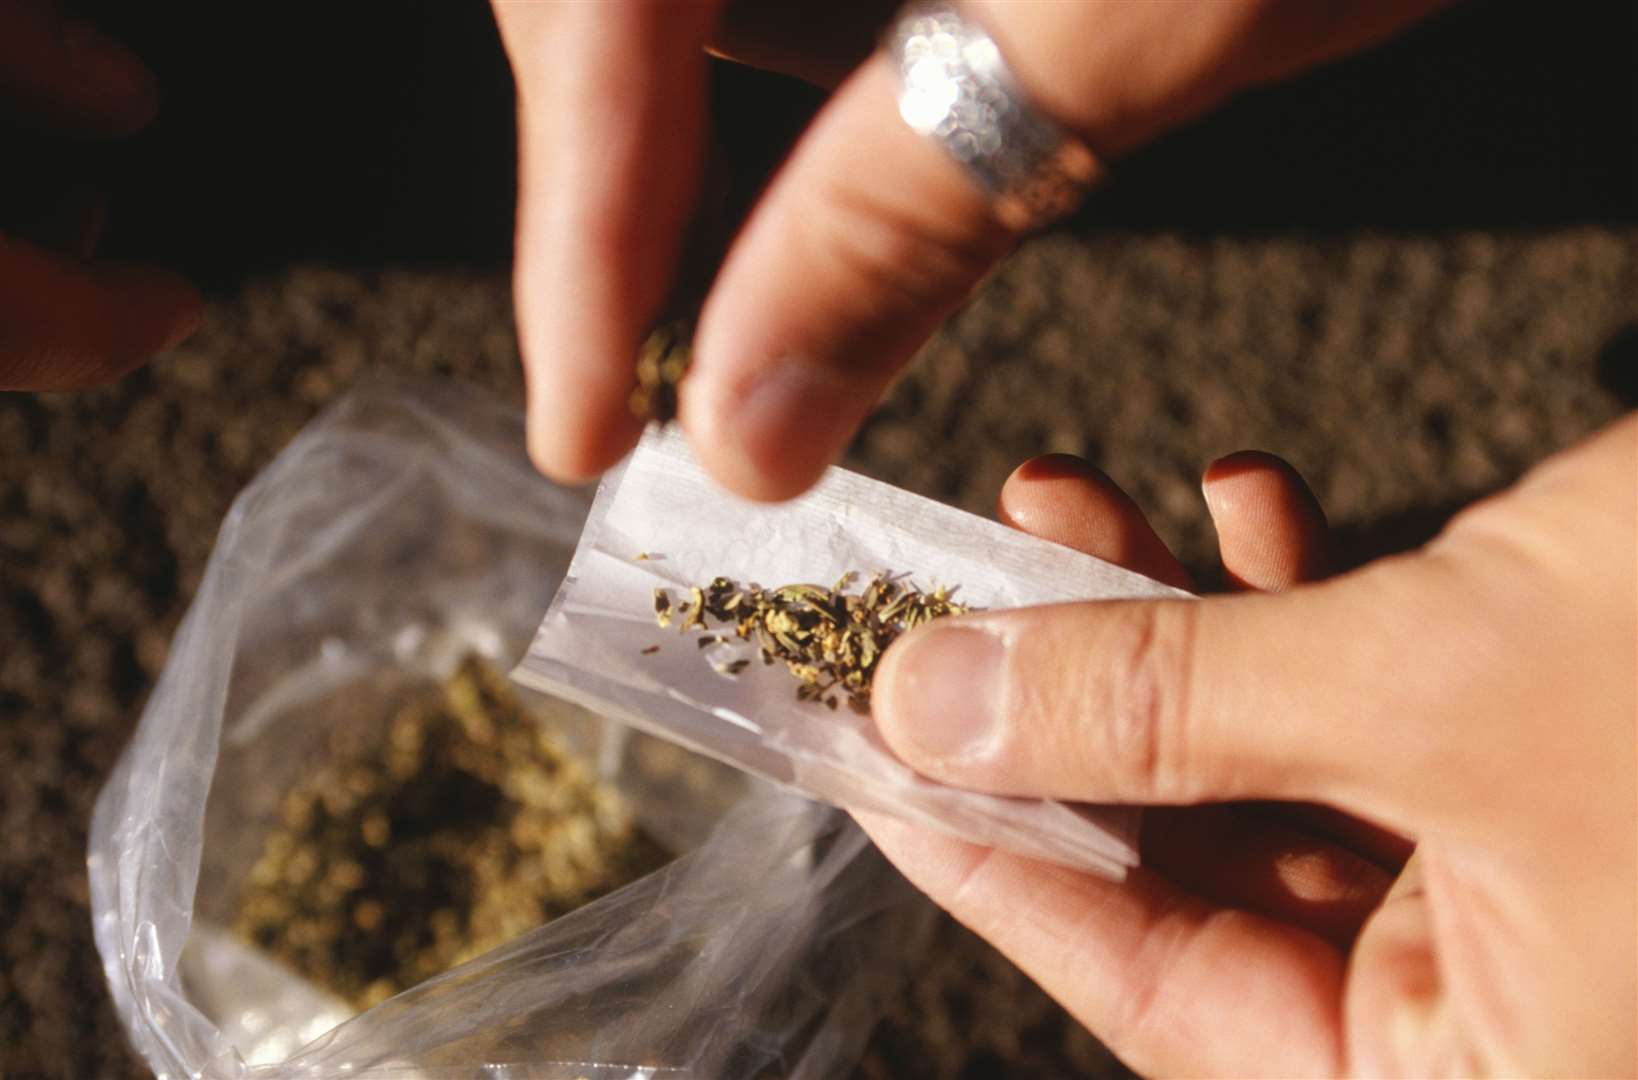 Most of the offences involved cannabis. Picture: Thinkstock Image Library